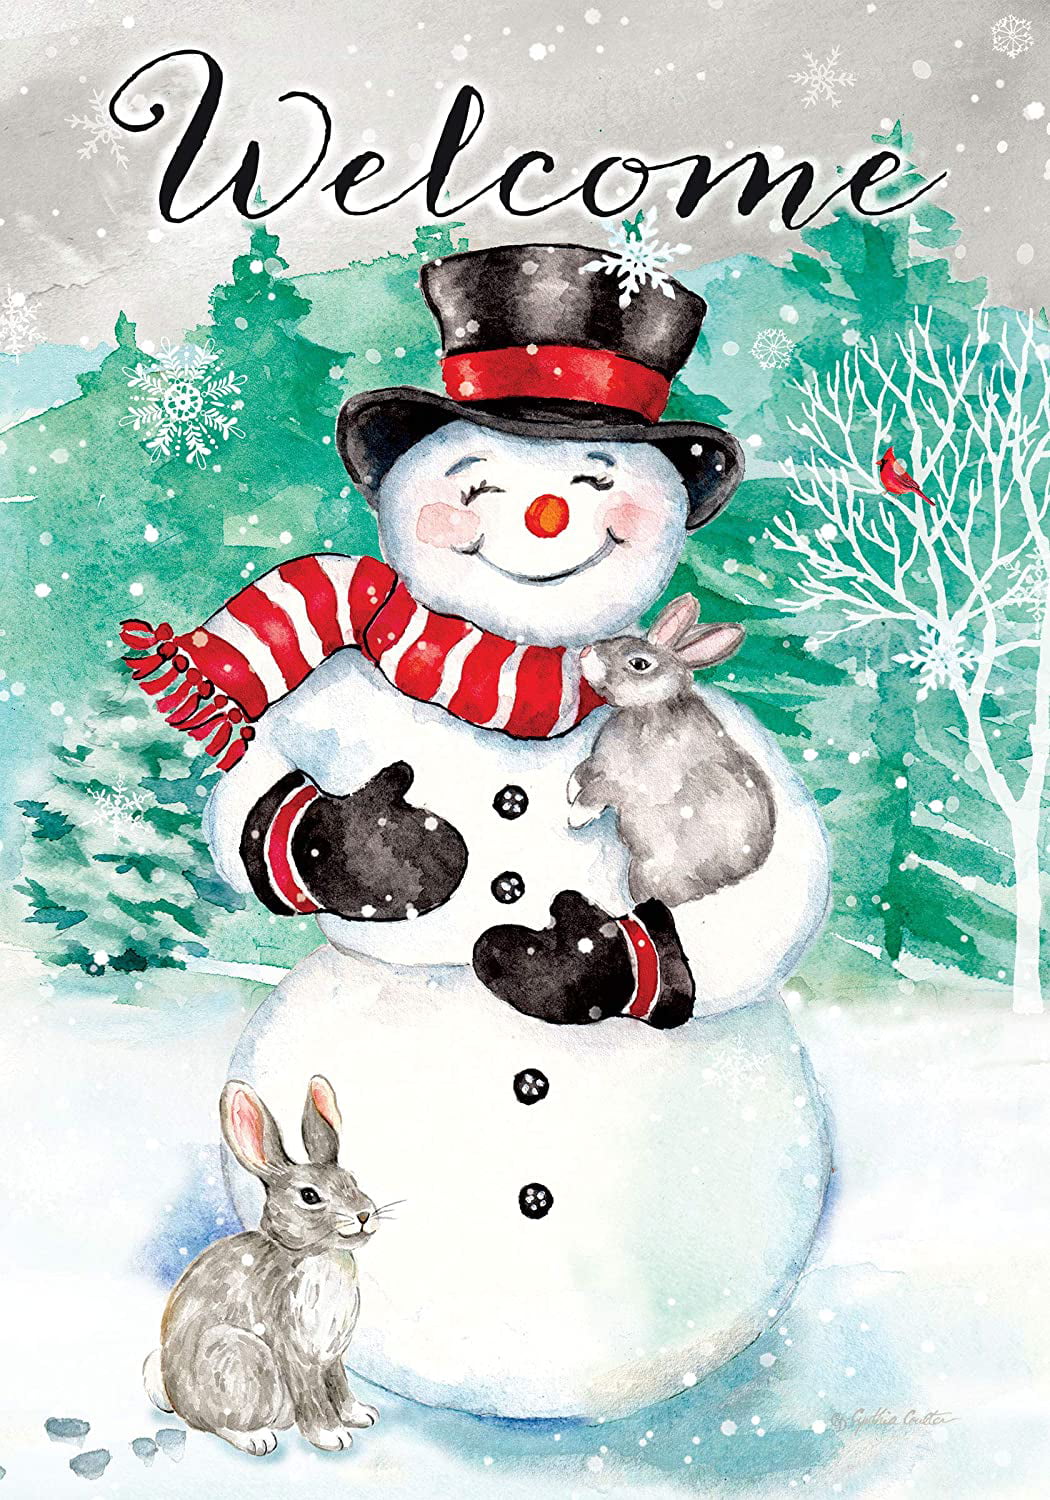 INC CUSTOM DECOR Size Decorative Double Sided Snowman Bunnies Printed in The USA 12 Inch X 18 Inch Approx Licensed and Copyrighted Flag Garden Size